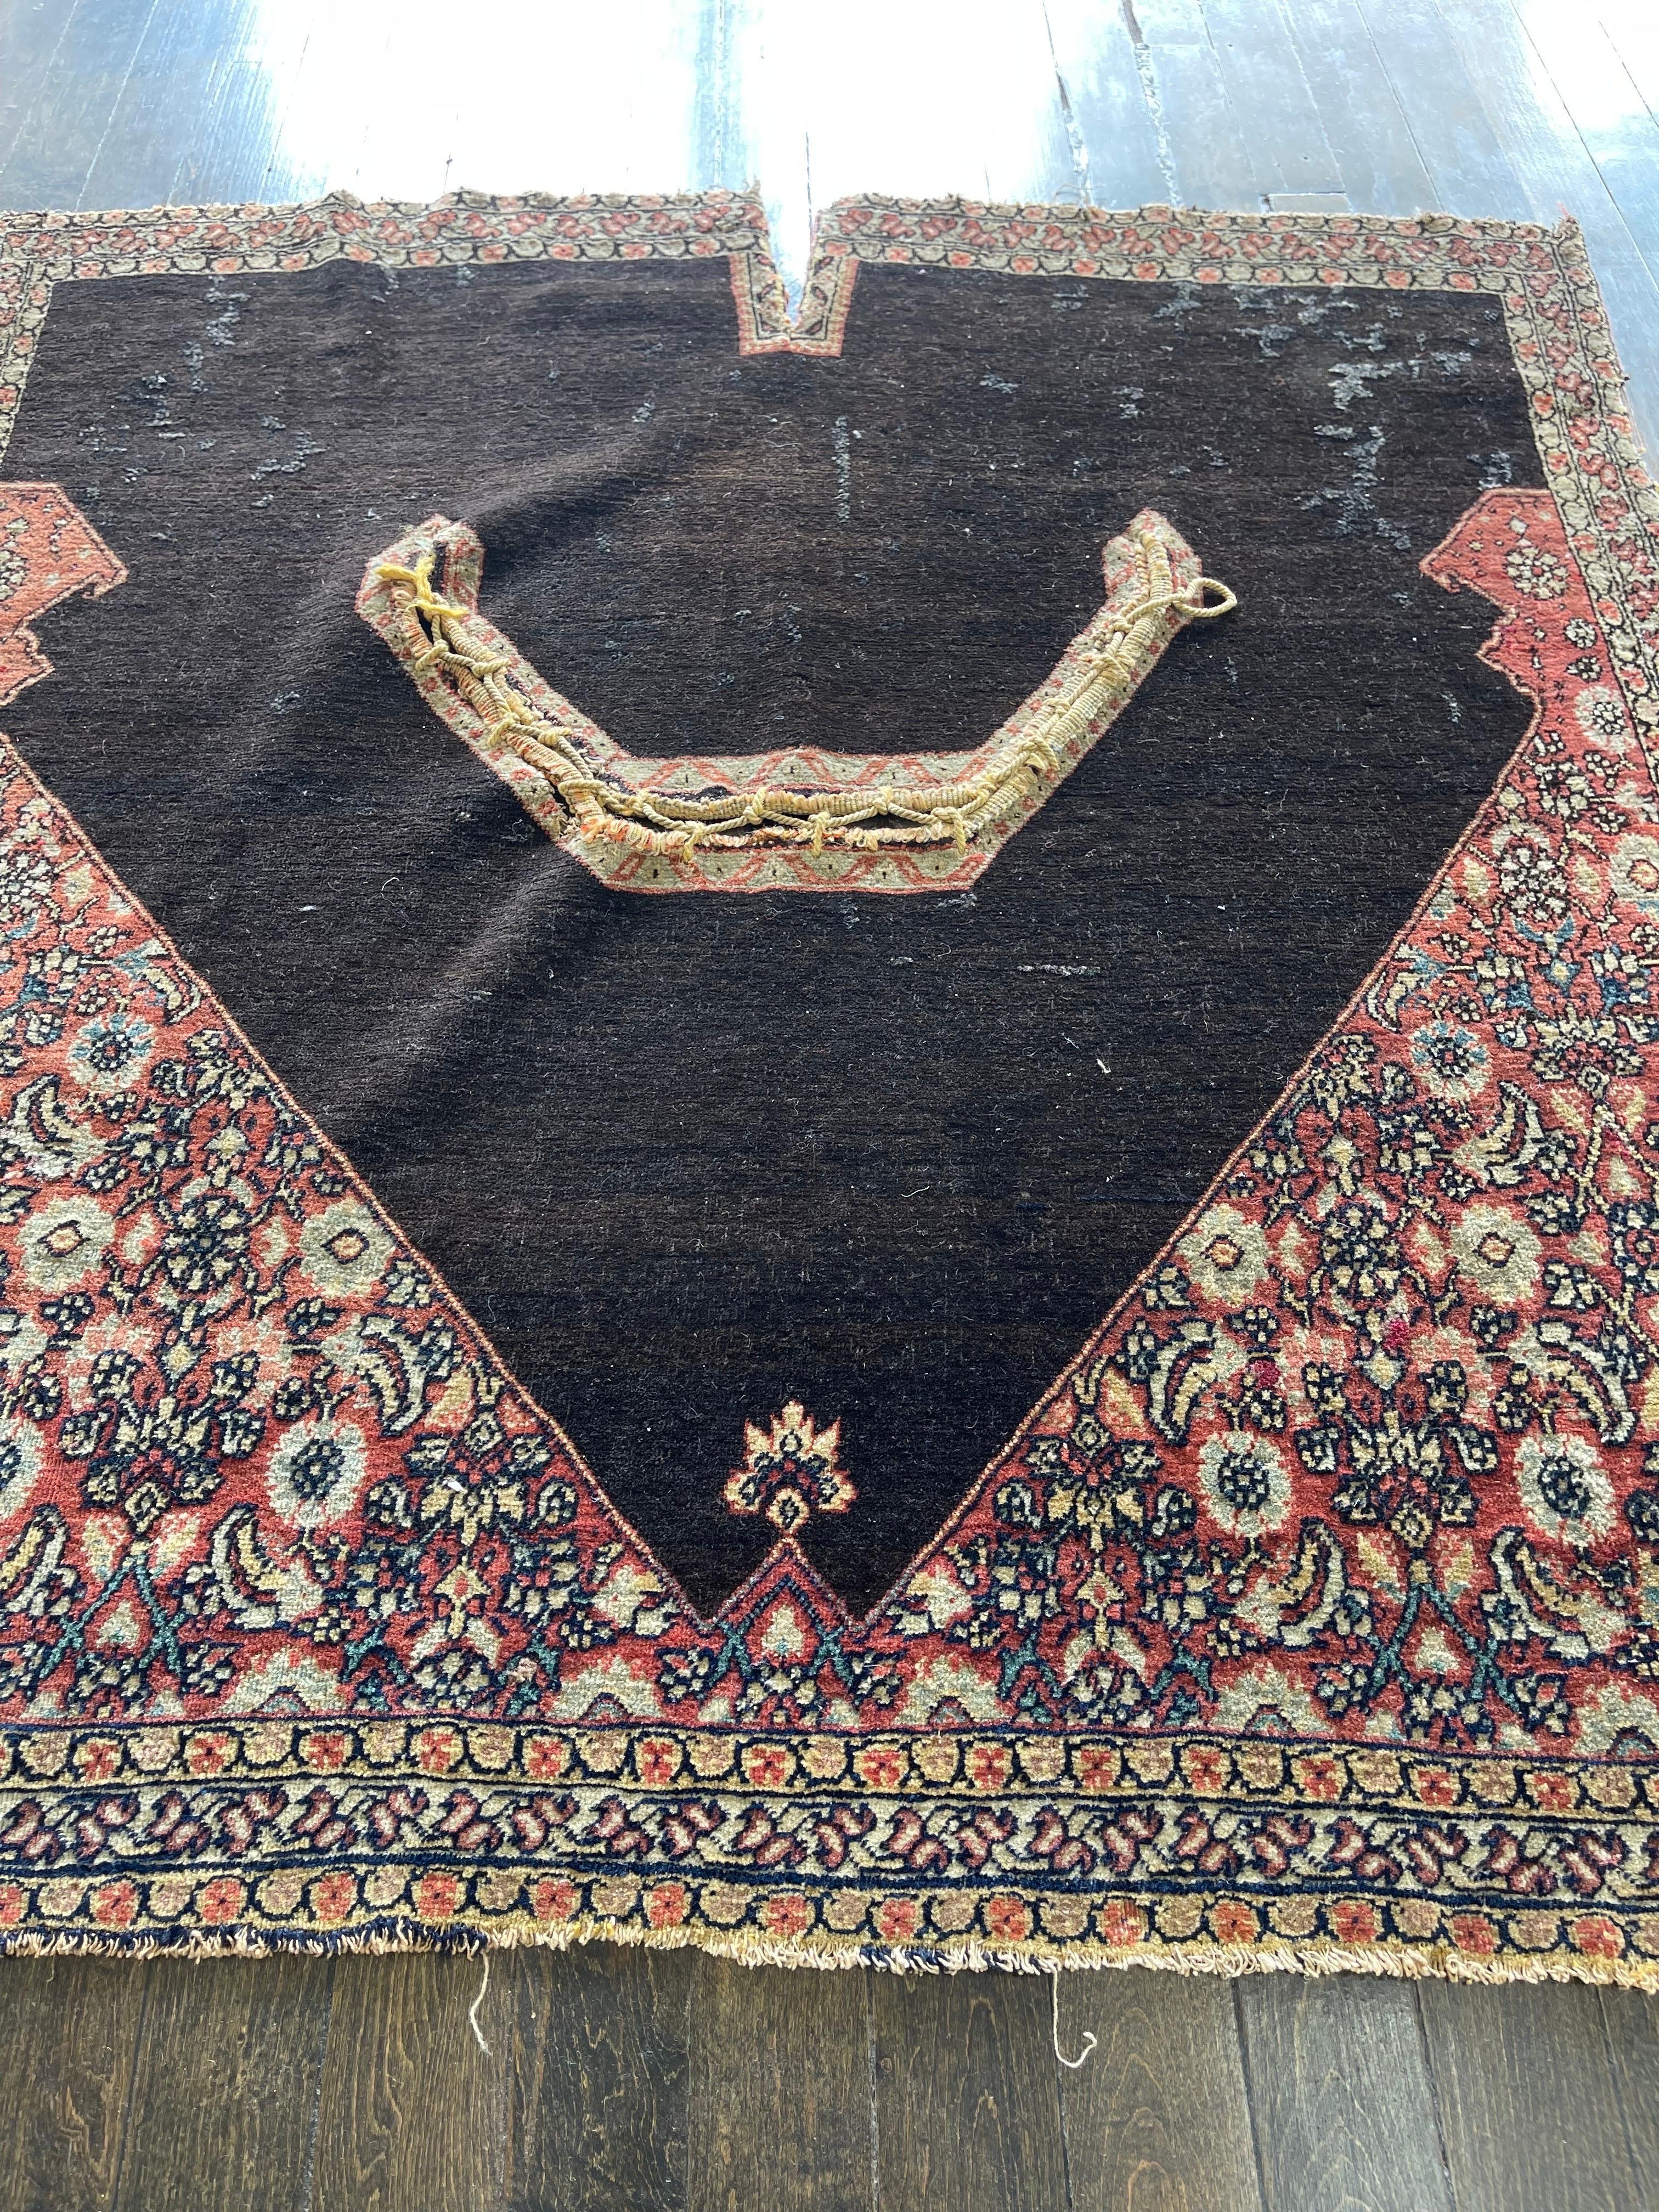 An incredible and rare horse cover rug woven in the northwest region of Iran.The piece was perhaps woven by an artist/weaver woman as a gift for her fiance,a Tribal tradition,and not for the market. Featuring a triangle plain black field surrounded